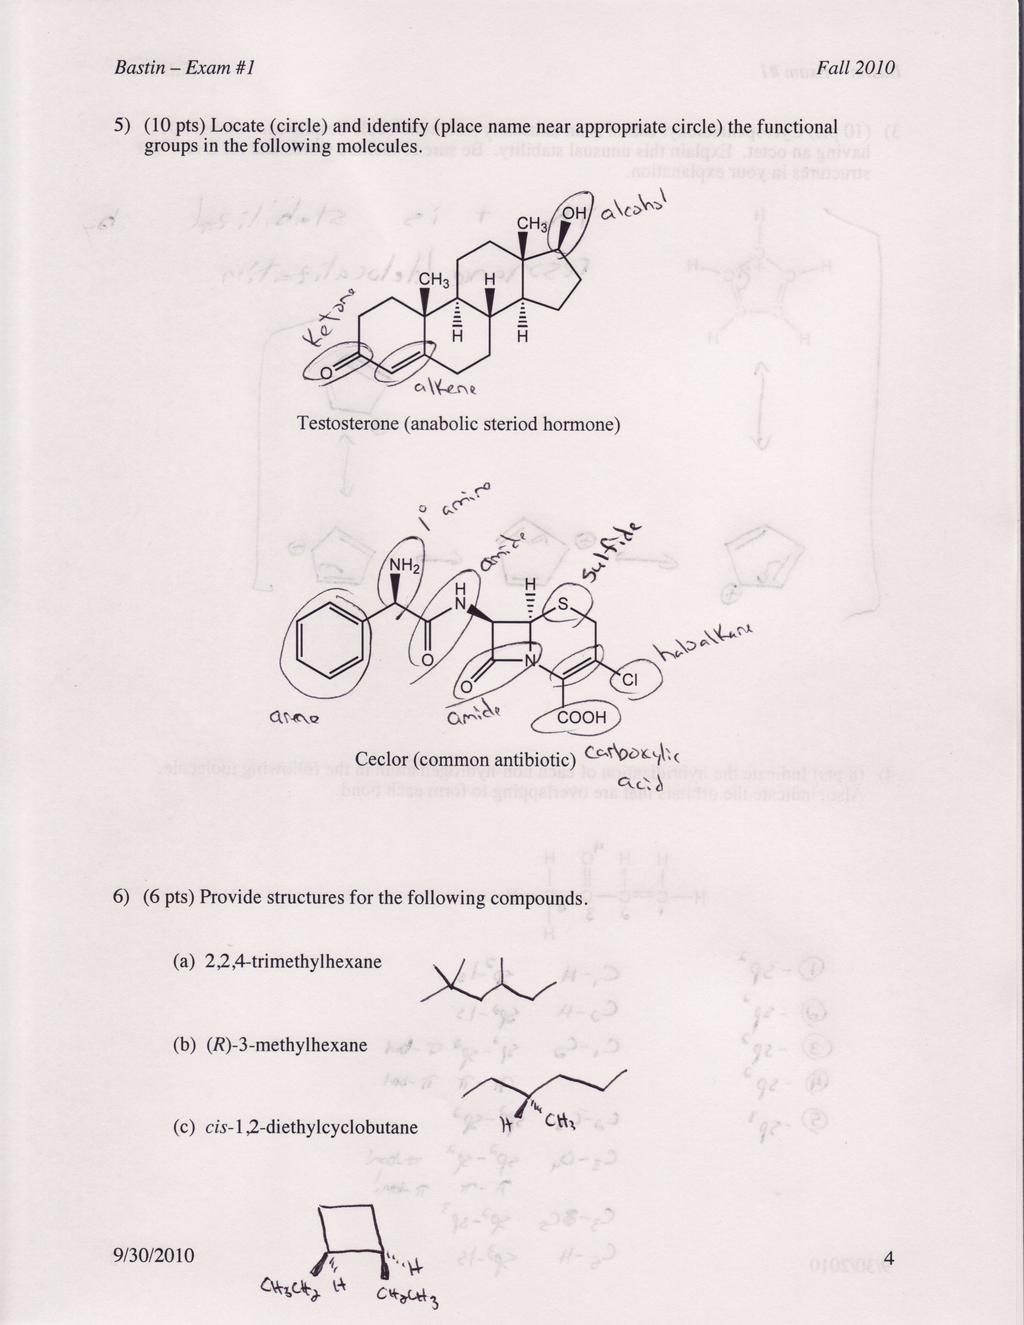 Bastin - Exam # Fal 2010 5) (10 pts) Locate (circle) and identify (place name near appropriate circle) the functional groups in the following molecules.